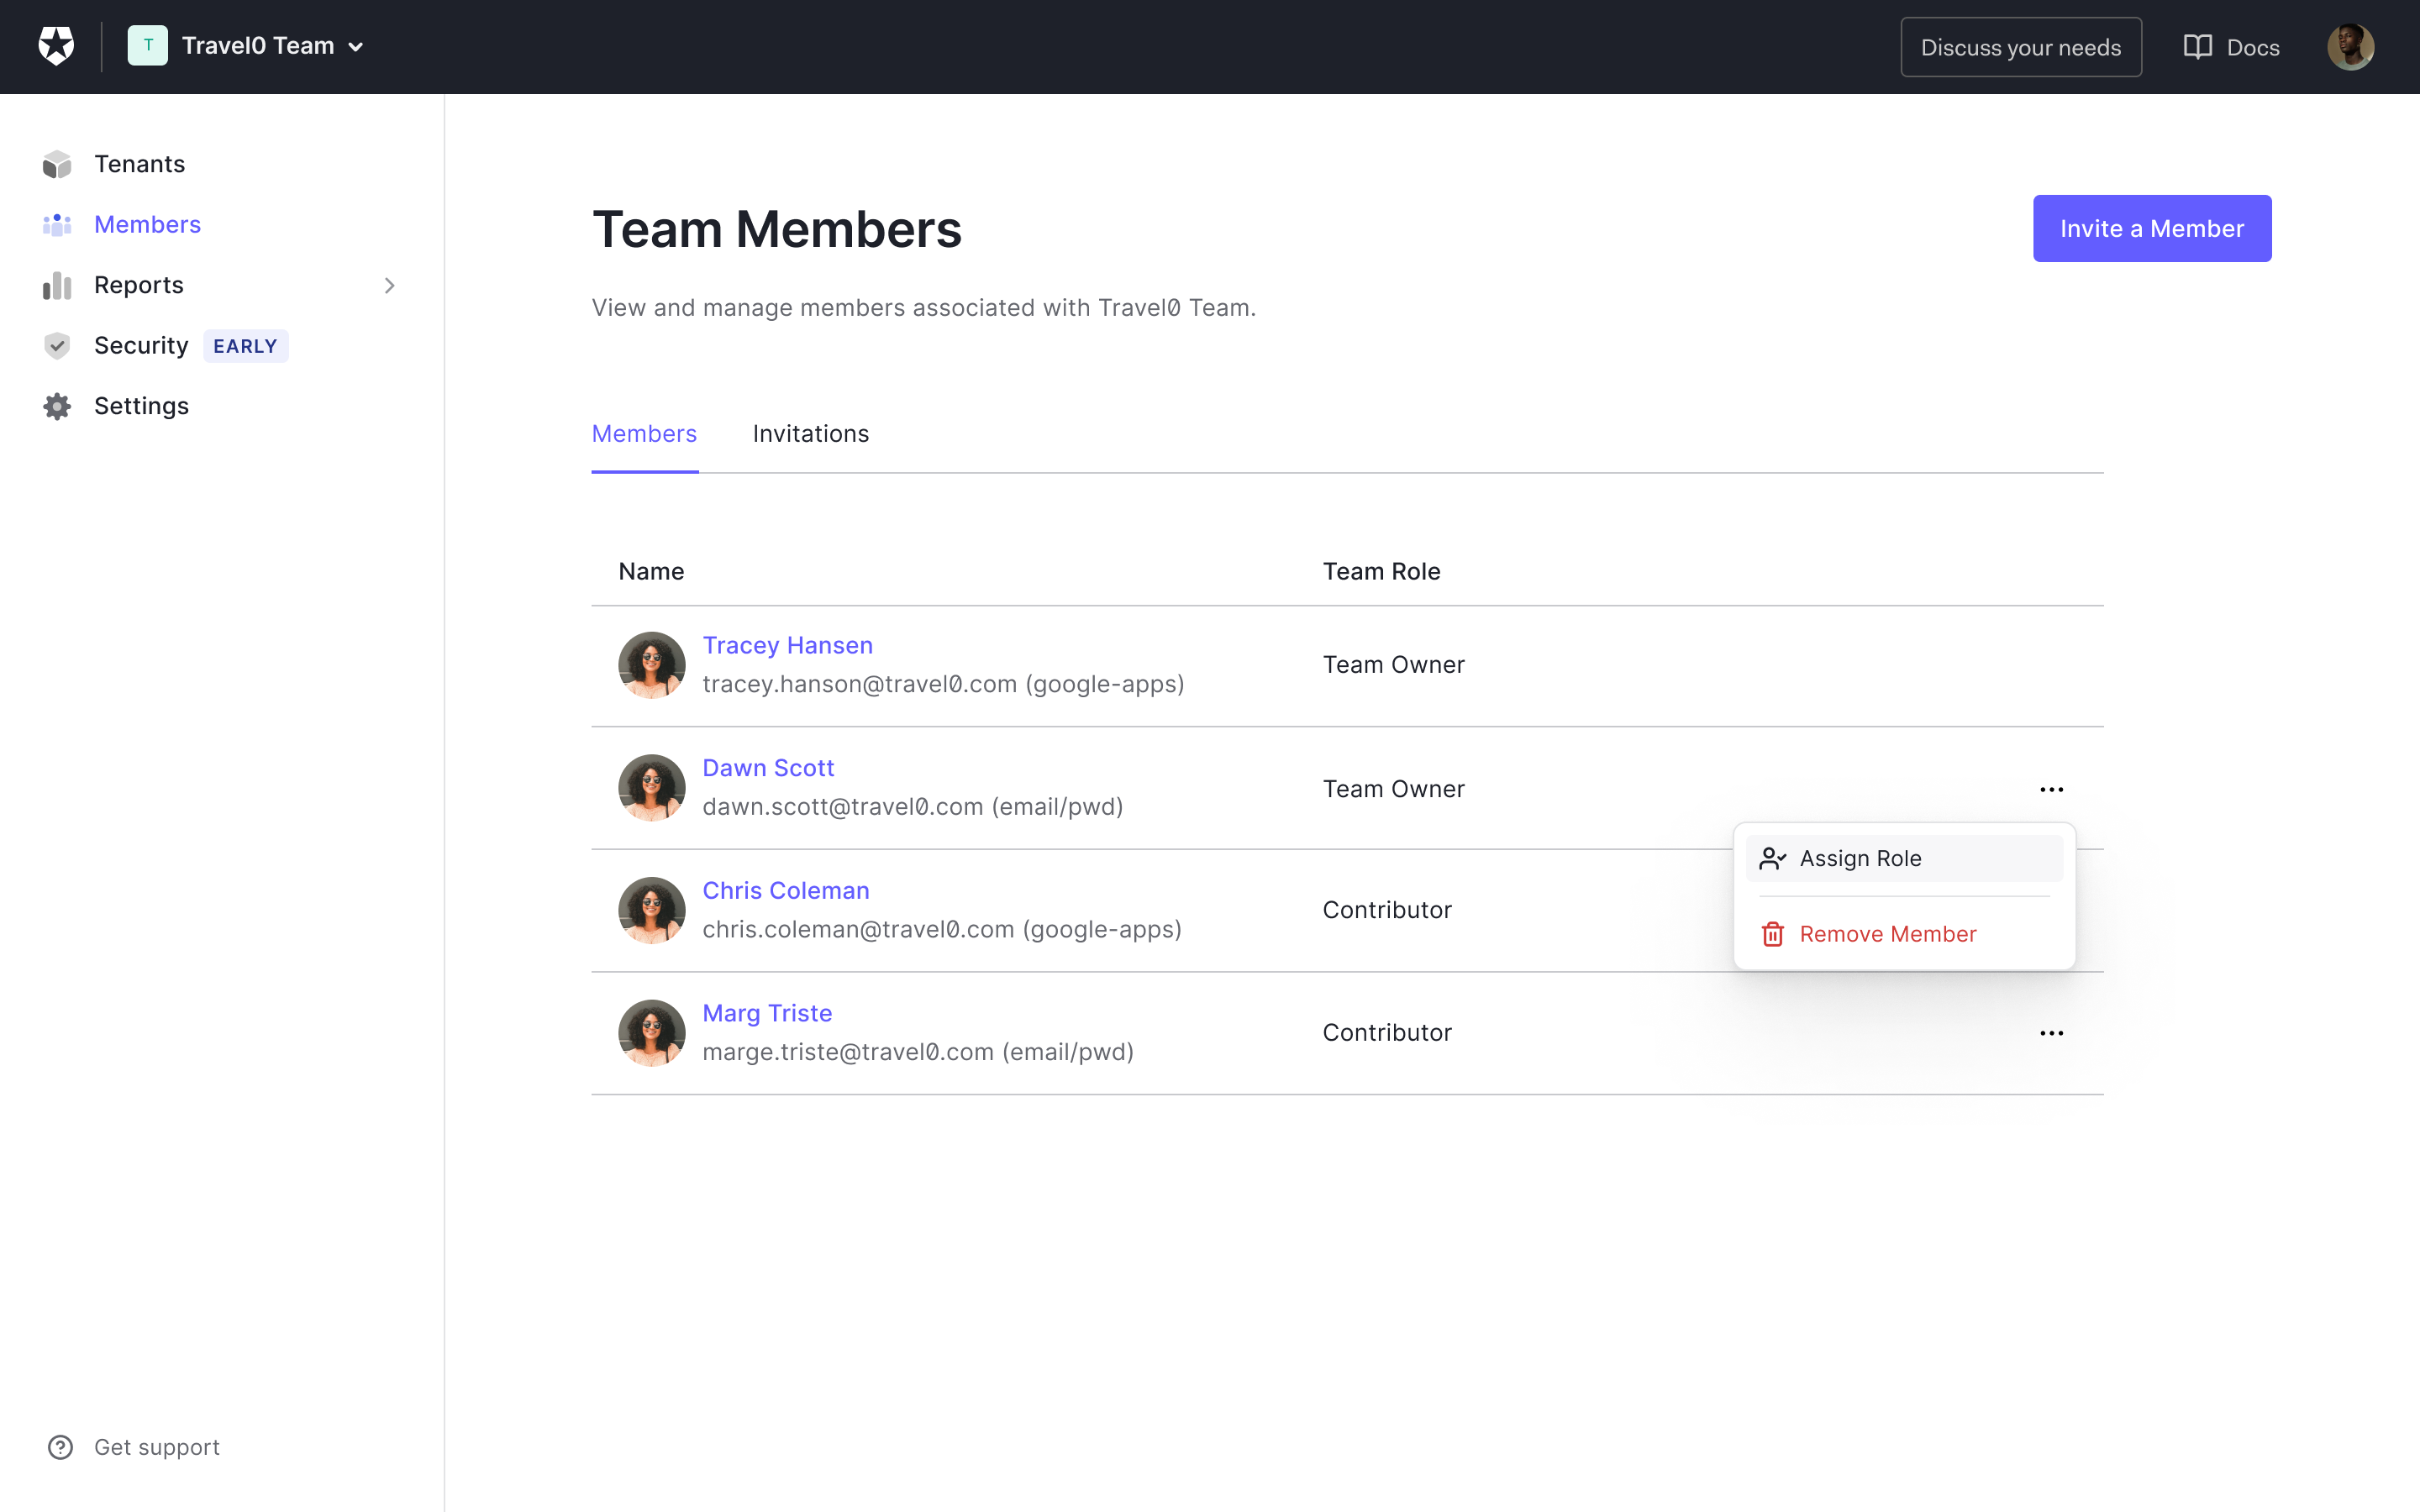 Update the Team Member role from an existing role